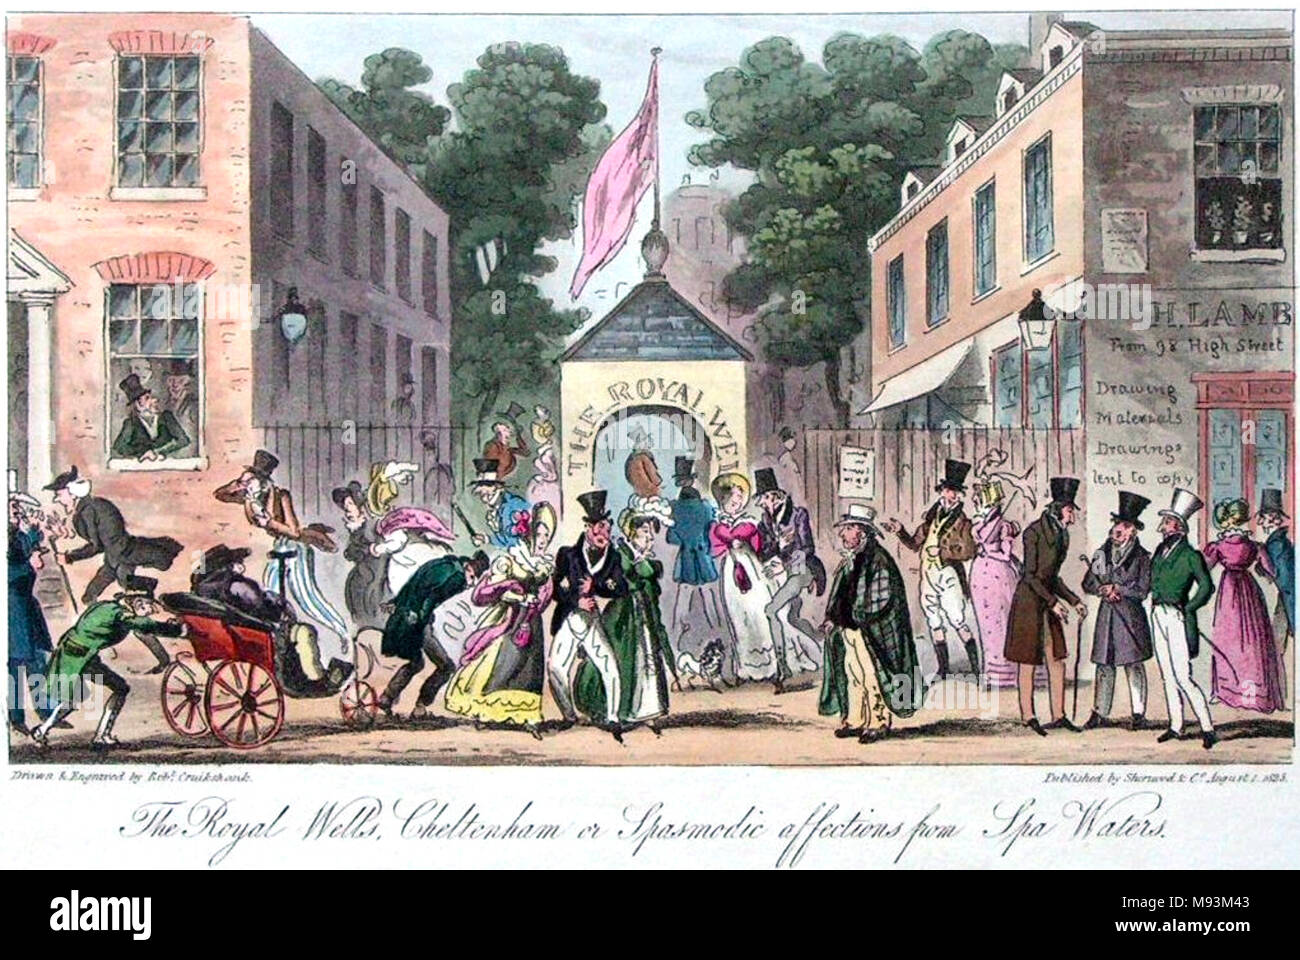 THE ROYAL WELLS spa at Cheltenham. An 1825 acquatint by Isaac Cruikshank from Blackmantle's The English Spy Stock Photo